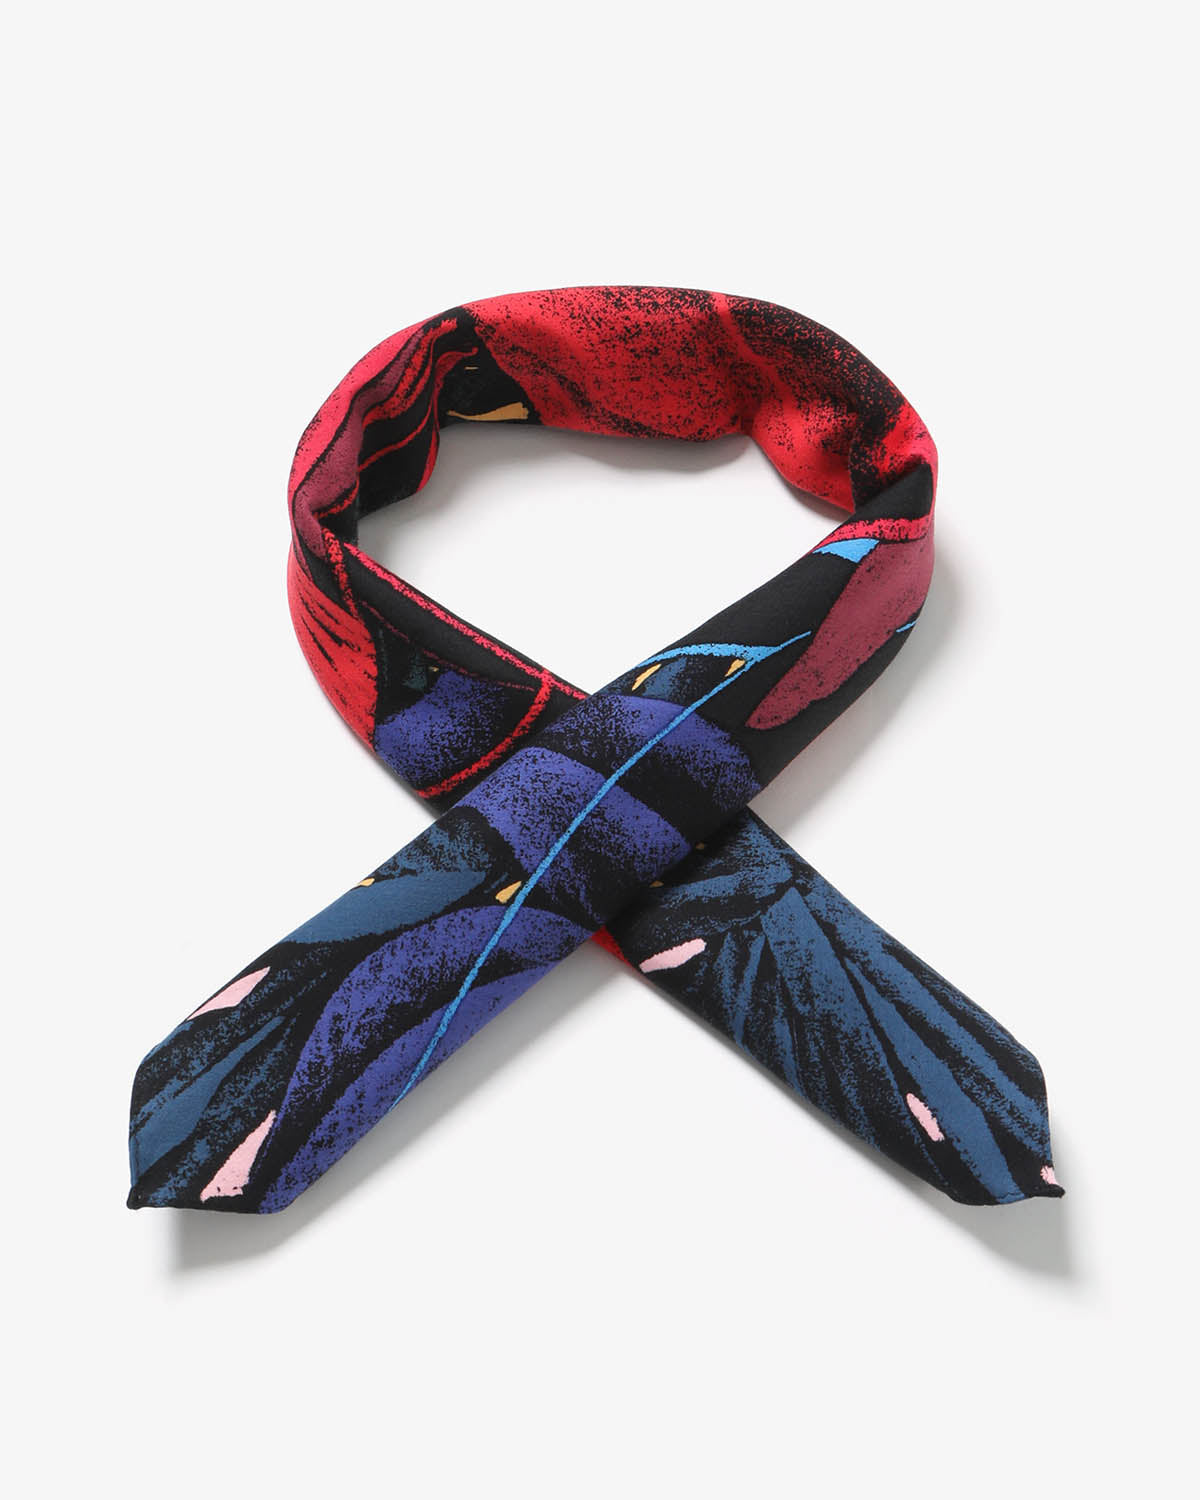 JULIEN COLOMBIER VERTICAL SOFT SCARF SMALL